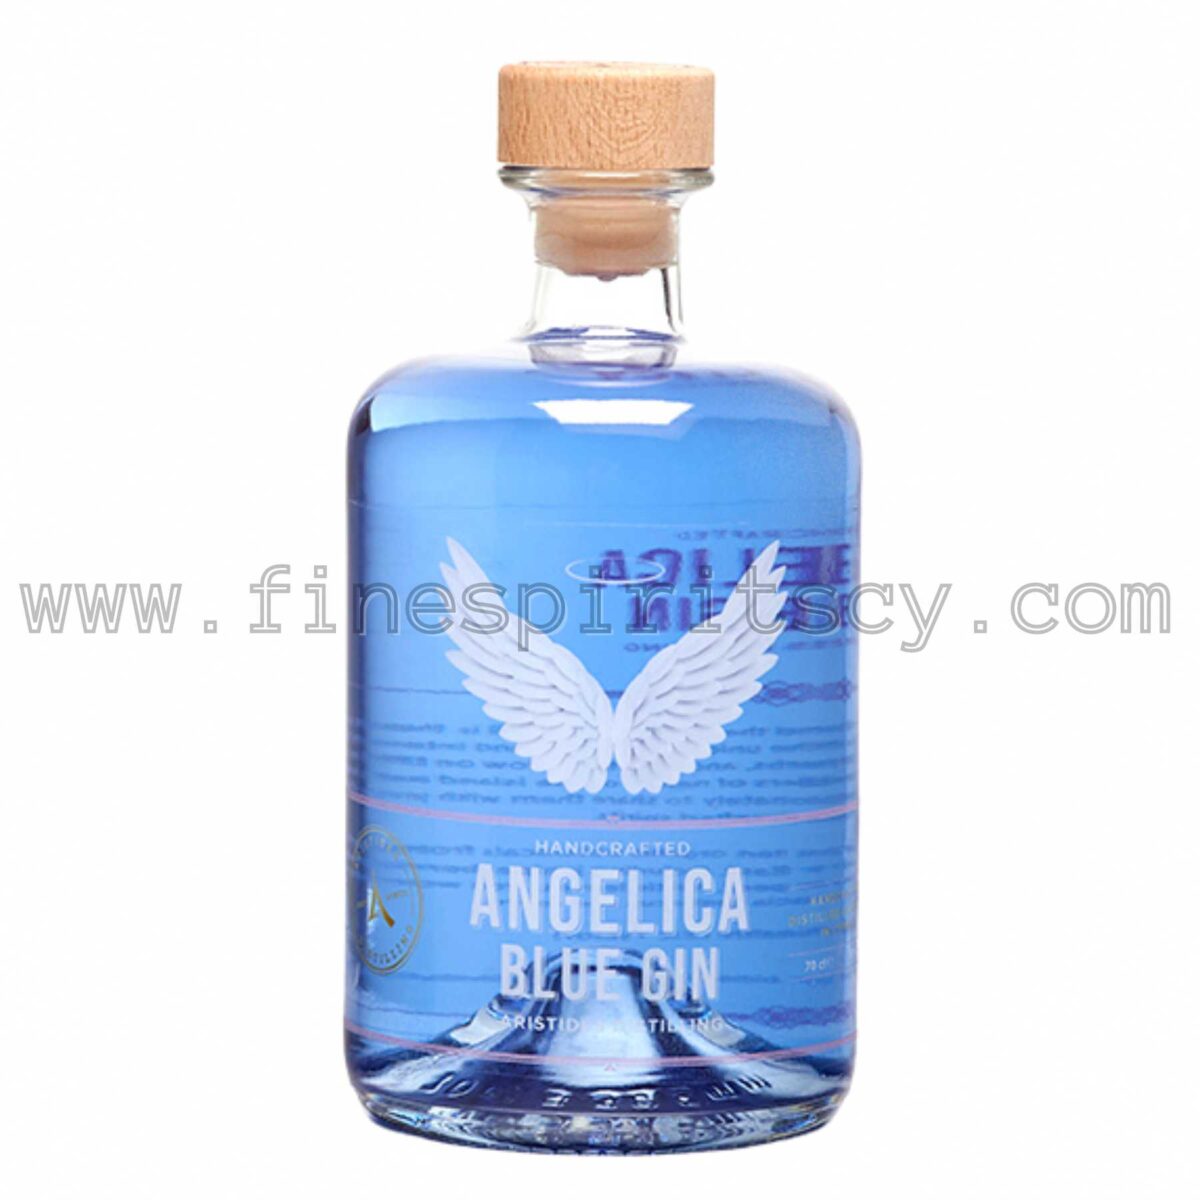 Angelica Blue Cypriot Dry Gin 700ml 70cl 0.7L Price Cyprus Fine Spirits CY